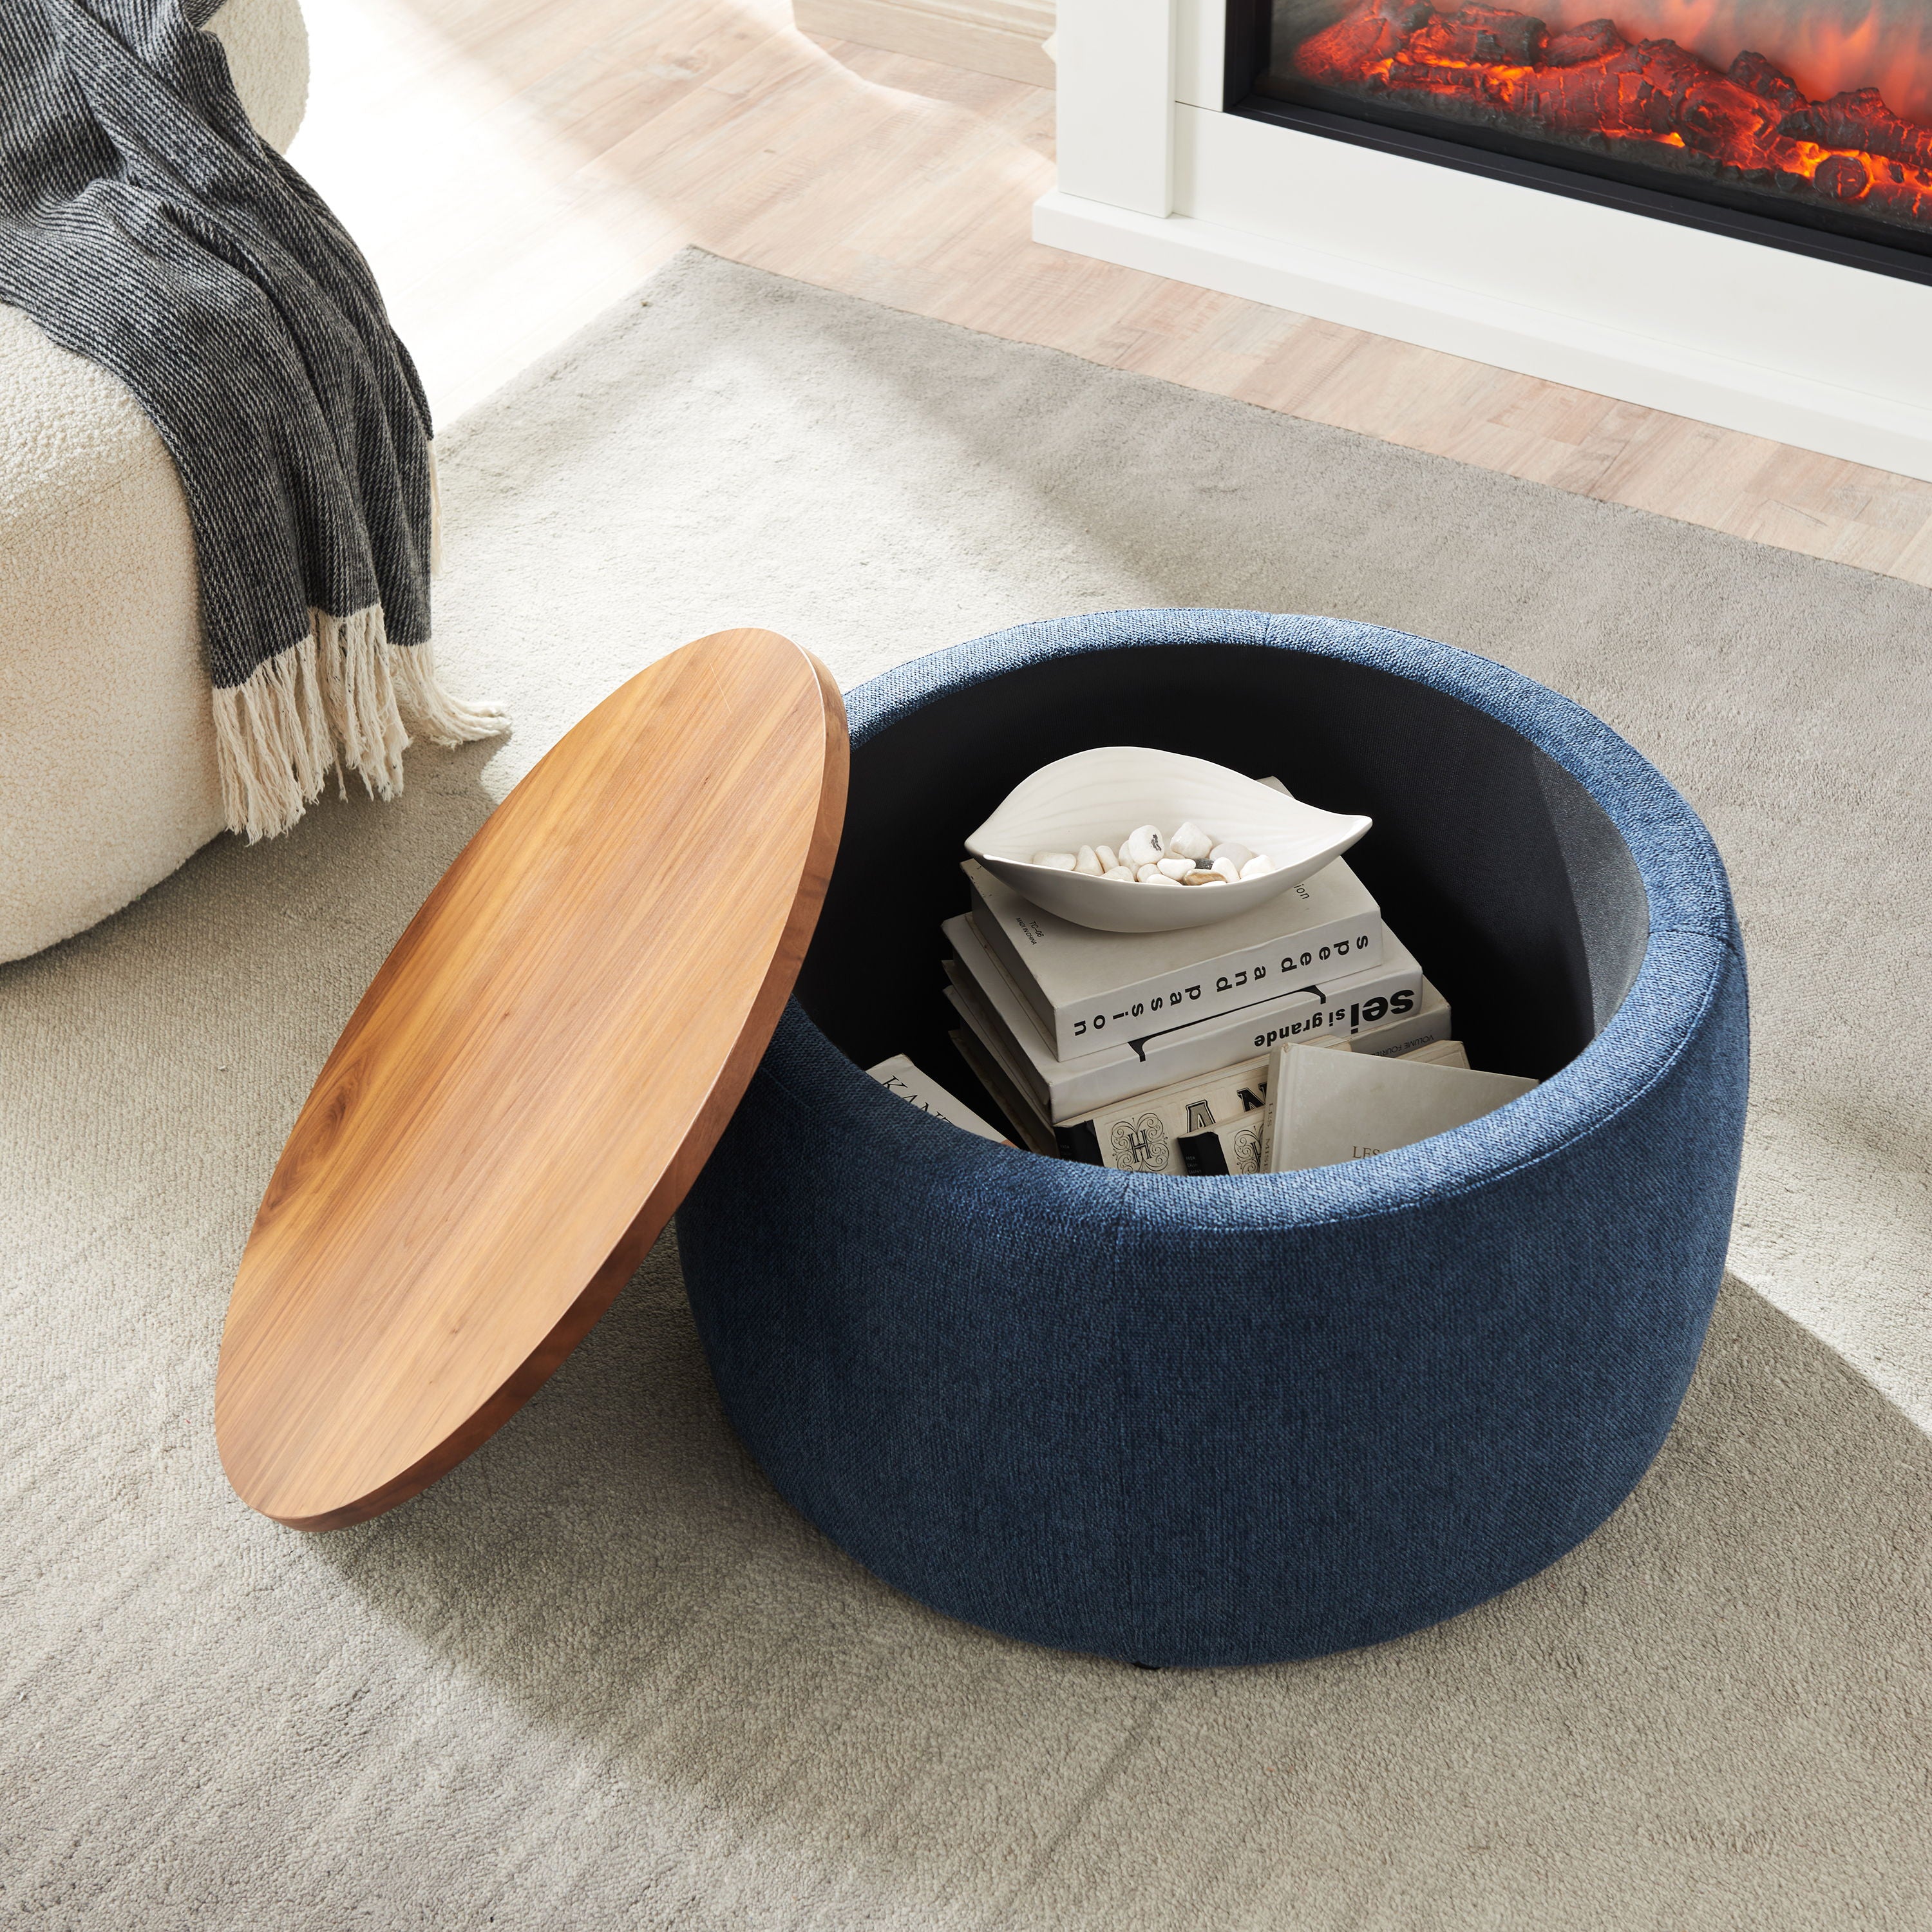 Round Storage Ottoman, 2 Inch 1 Function, Work As End Table And Ottoman, Navy (25.5"X25.5"X14.5")